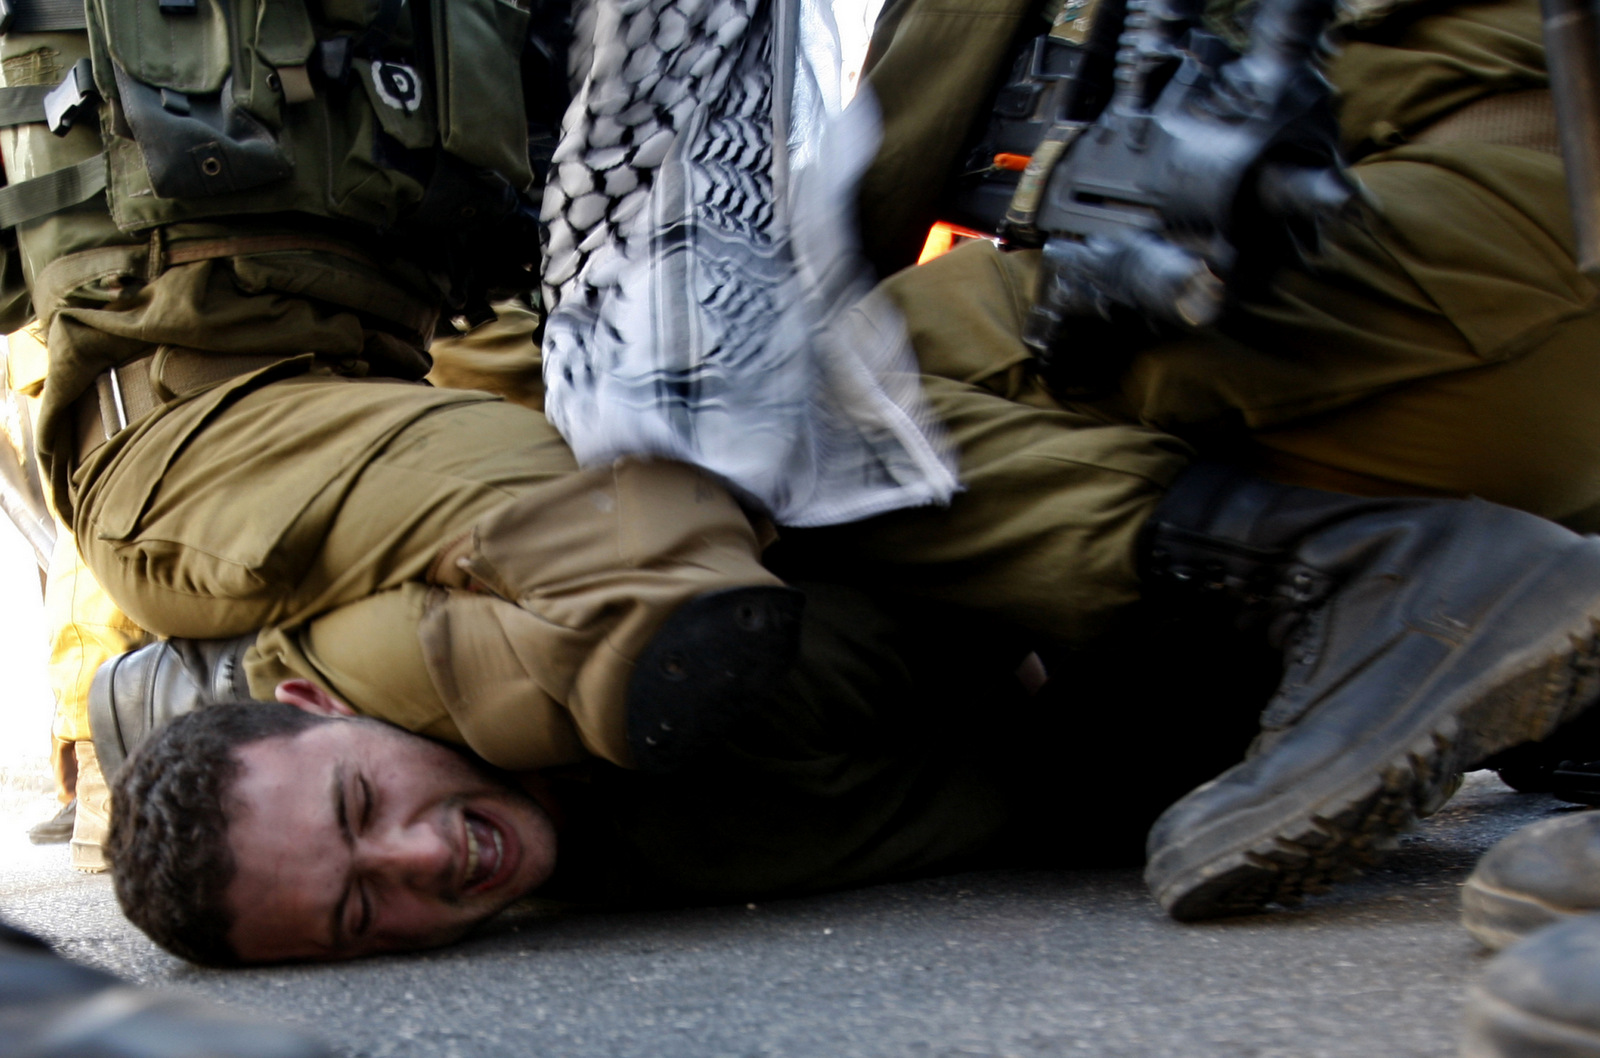 A Palestinians activist is detained by Israeli soldiers during a protest against the Prawer Plan to resettle Israel’s Palestinian Bedouin minority near the Israeli settlement of Bet El, north of Ramallah, Nov. 30, 2013. (AP/Majdi Mohammed)